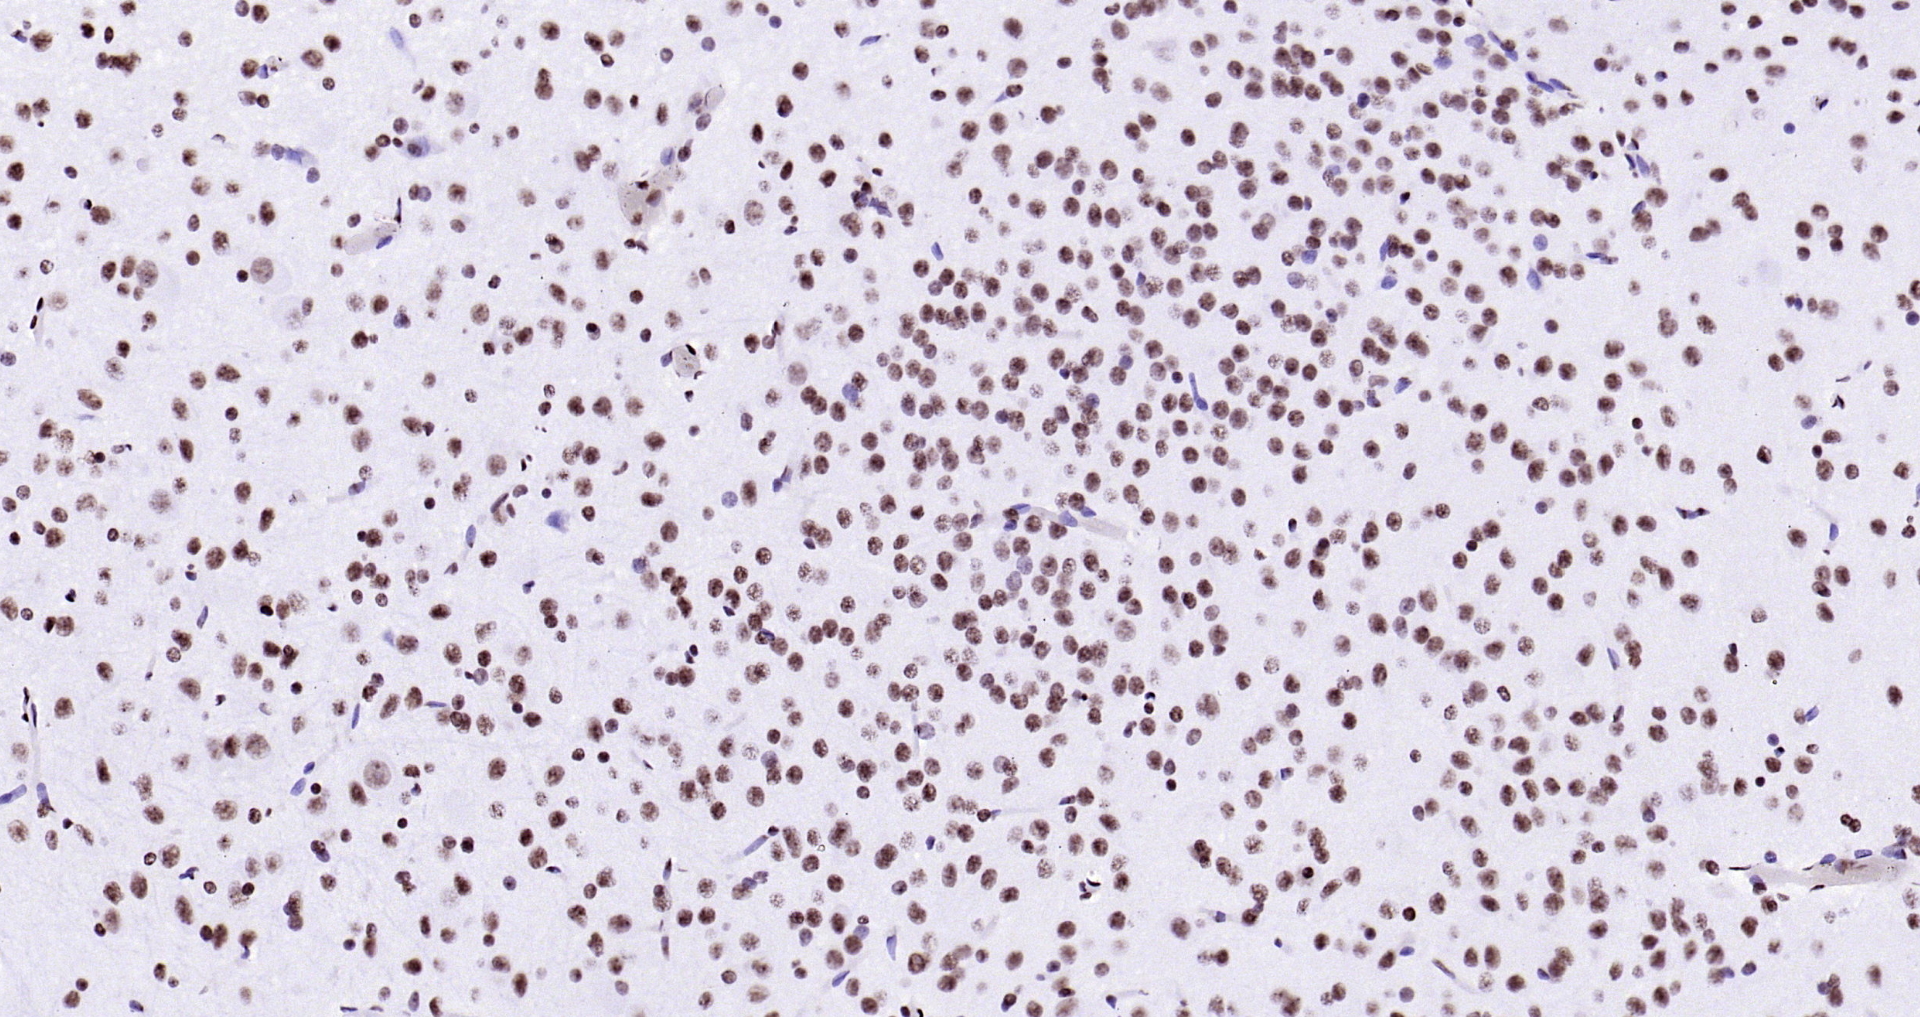 Paraformaldehyde-fixed, paraffin embedded Rat brain; Antigen retrieval by boiling in sodium citrate buffer (pH6.0) for 15min; Block endogenous peroxidase by 3% hydrogen peroxide for 20 minutes; Blocking buffer (normal goat serum) at 37°C for 30min; Antibody incubation with Histone H3 (Tri Methyl K4) Polyclonal Antibody, Unconjugated (bs-4715R) at 1:200 overnight at 4°C, DAB staining.